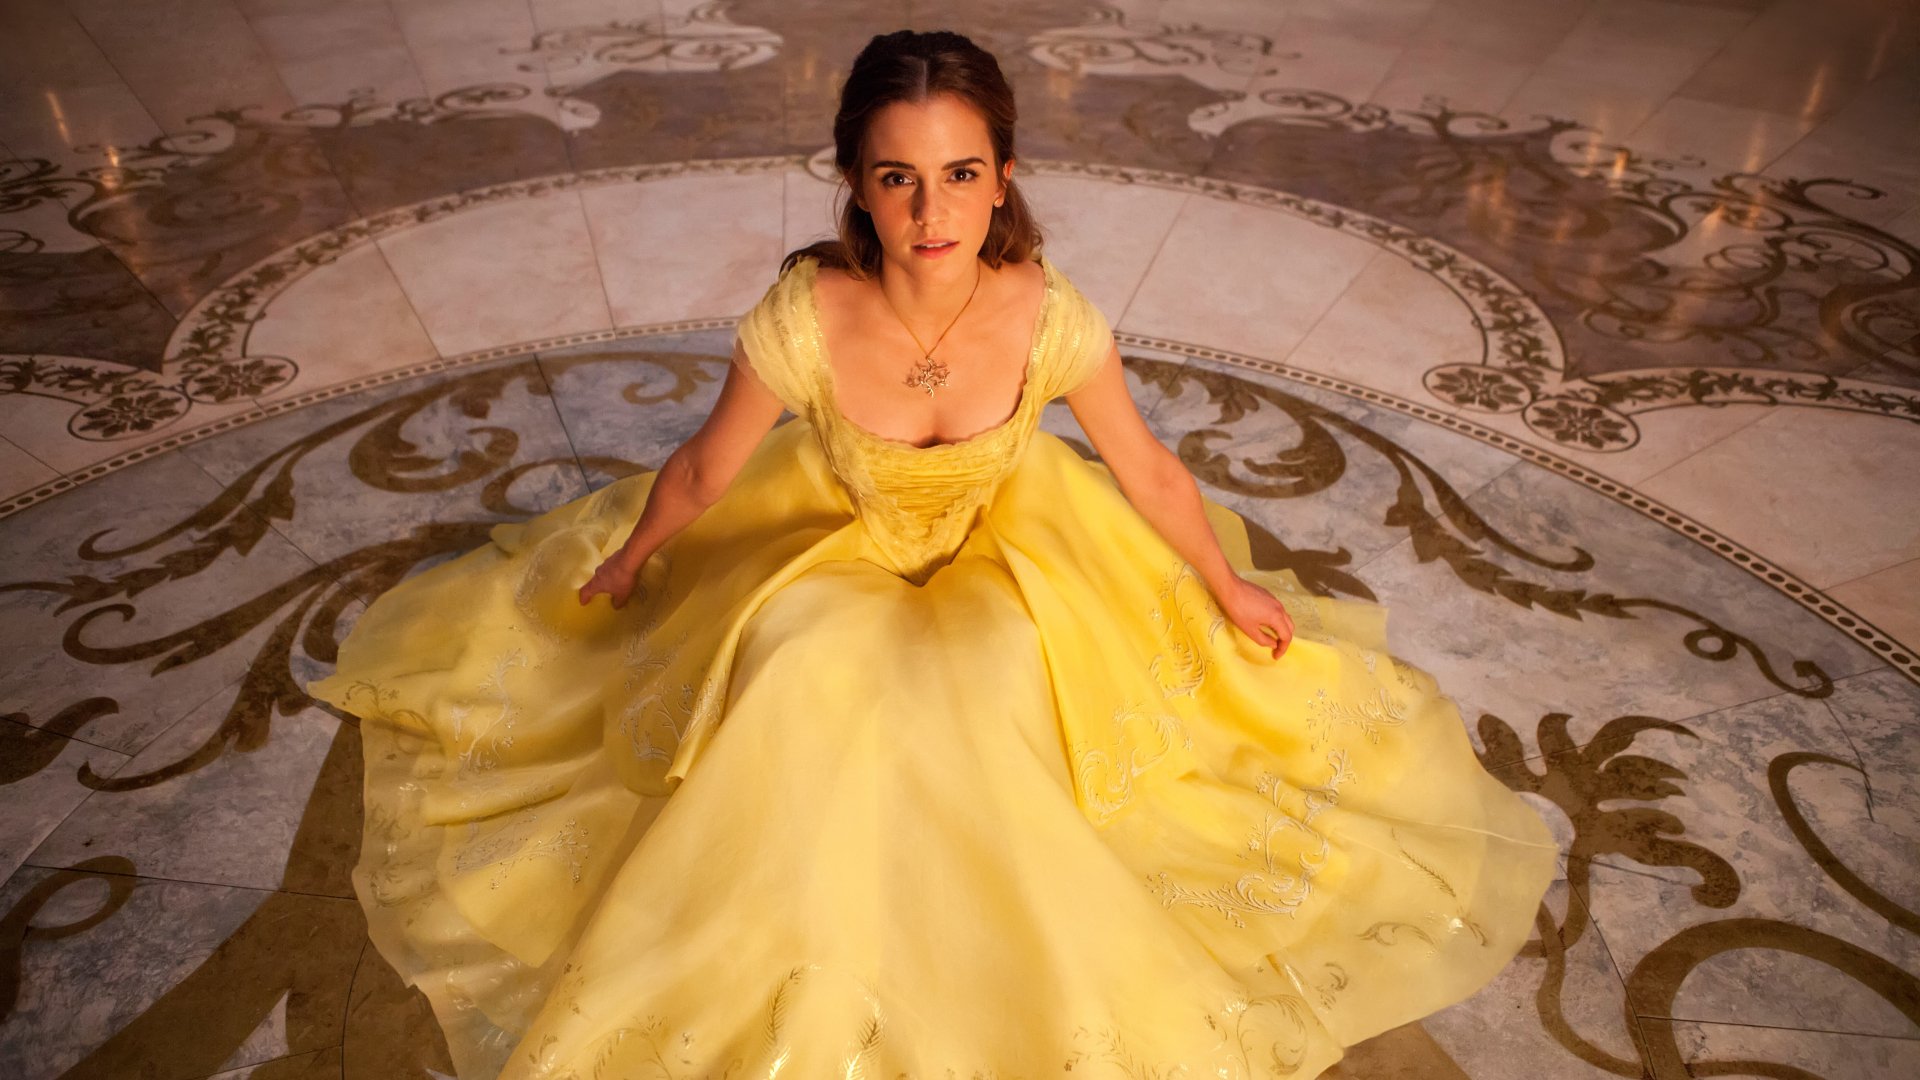 Emma Watson as Belle in Beauty and the Beast (2017)